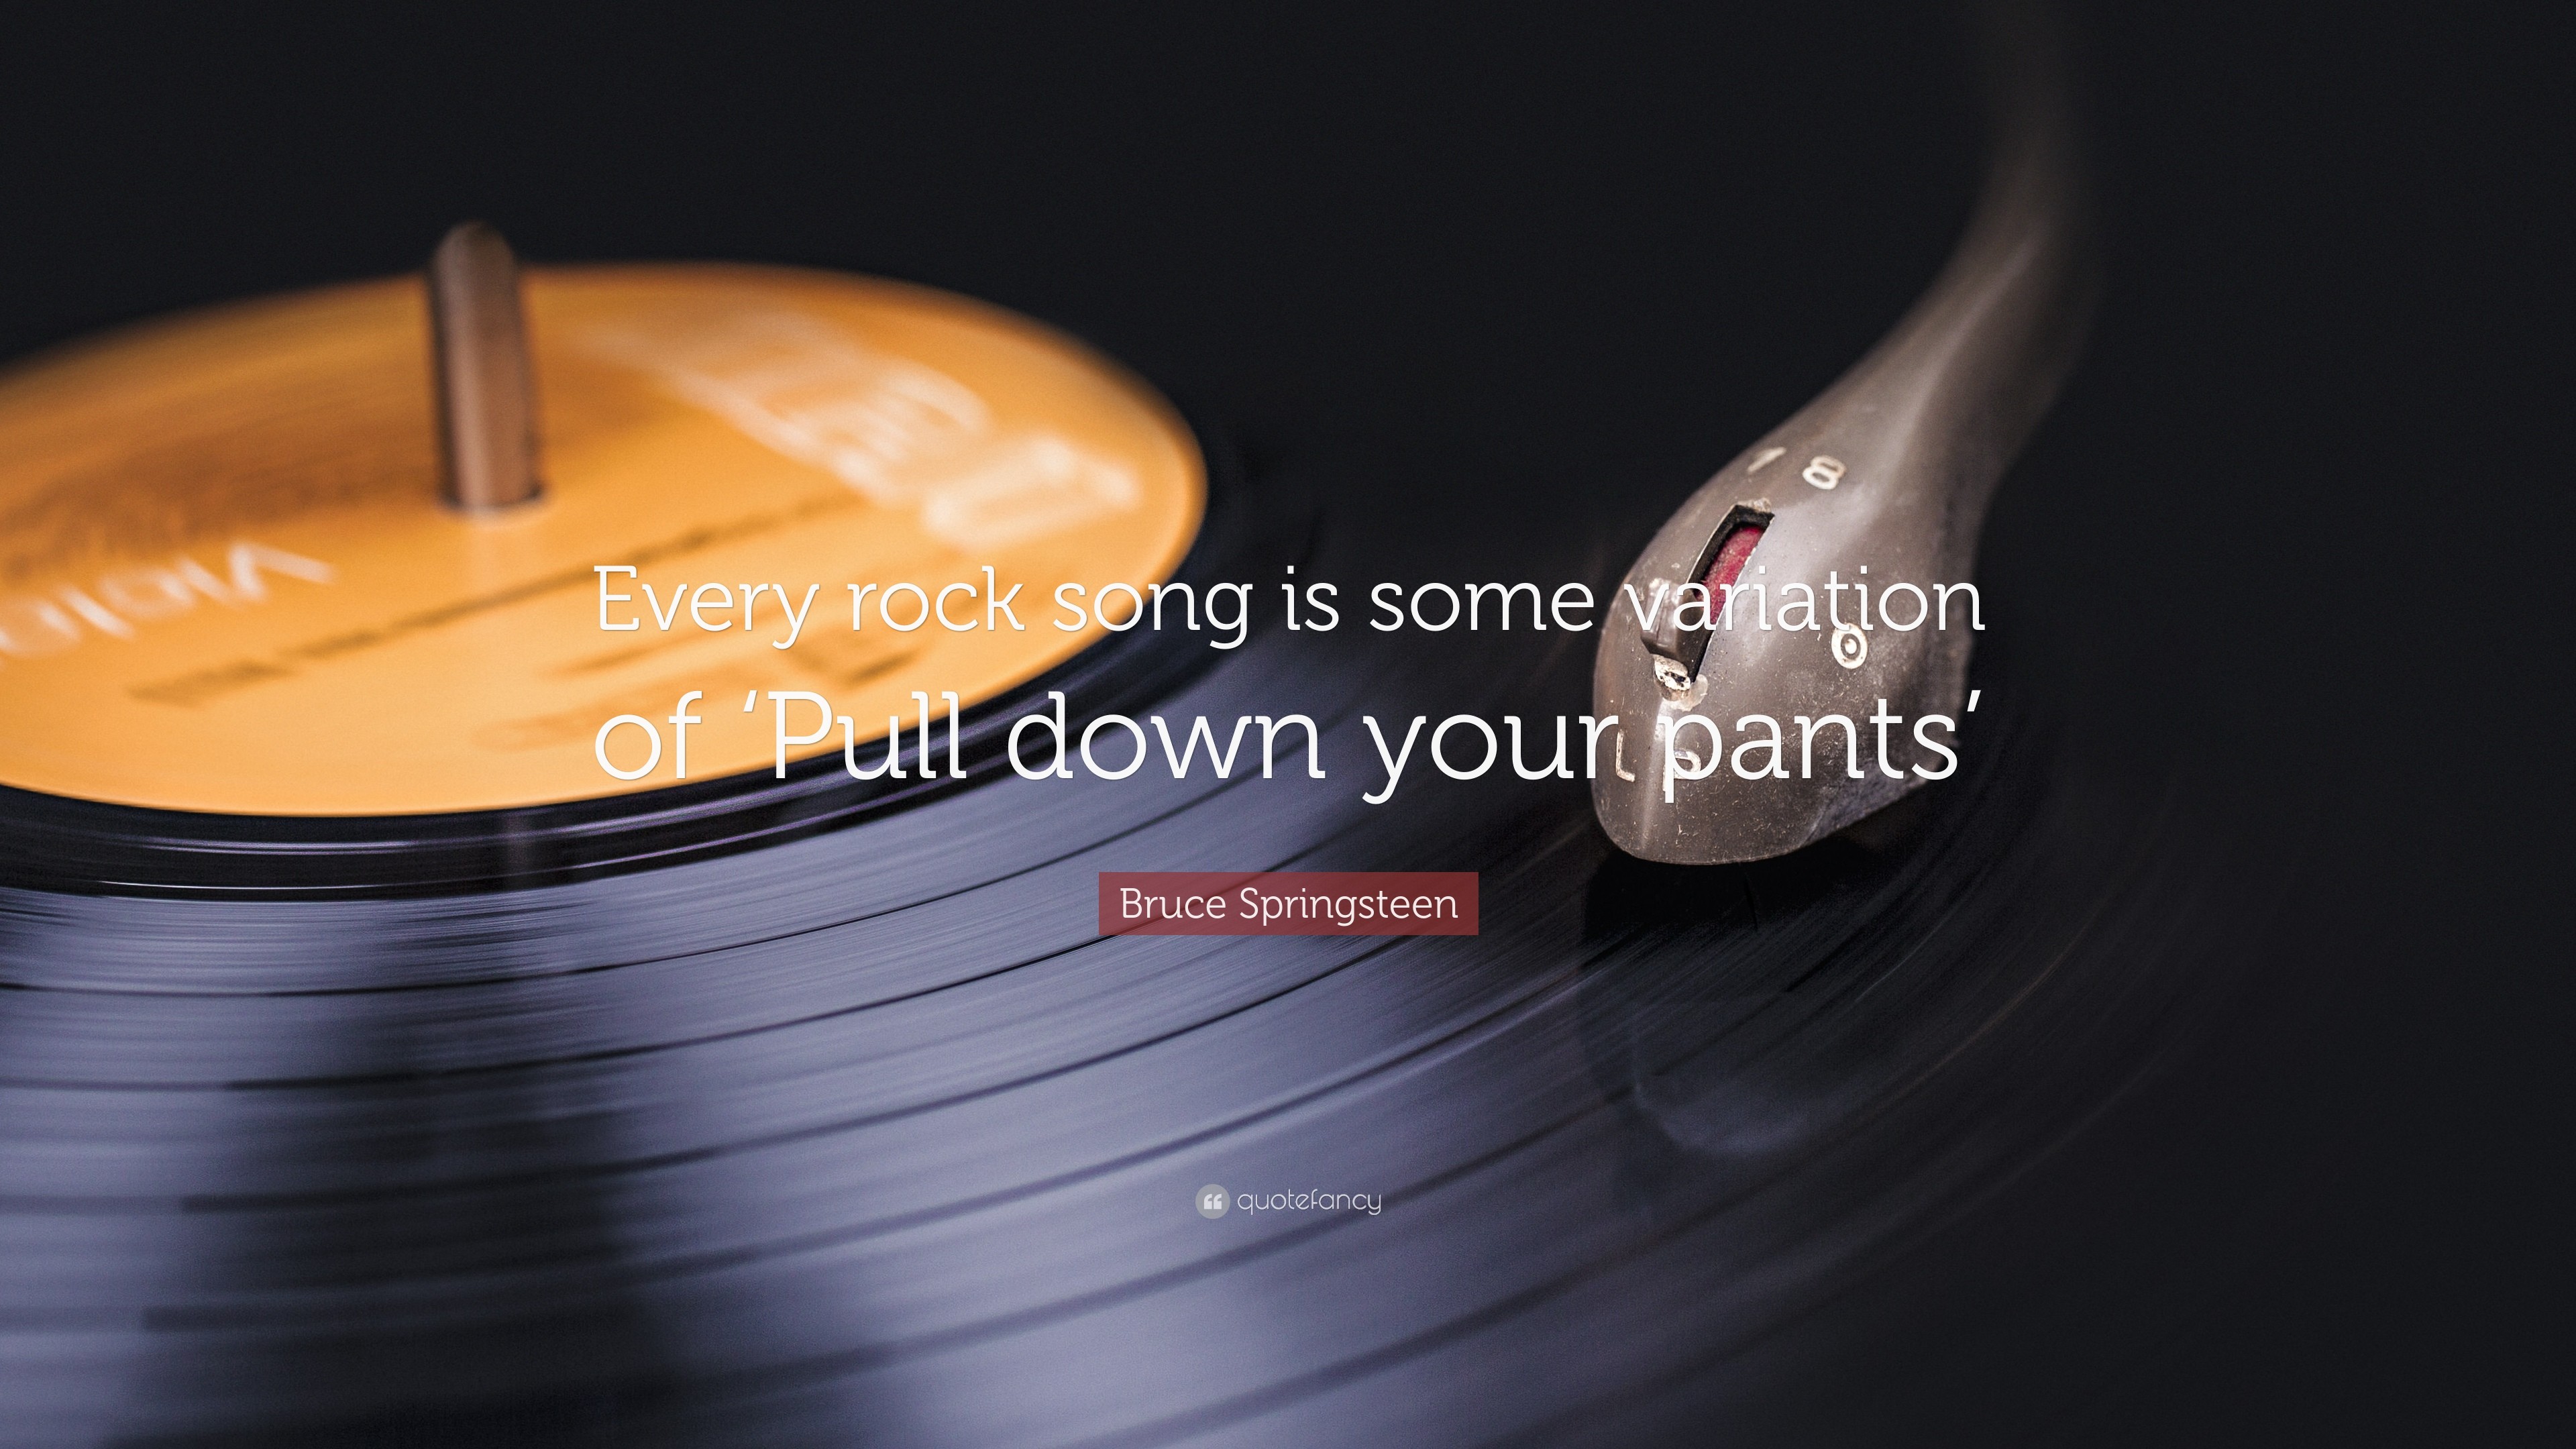 3840x2160 Bruce Springsteen Quote: “Every rock song is some variation of 'Pull down  your